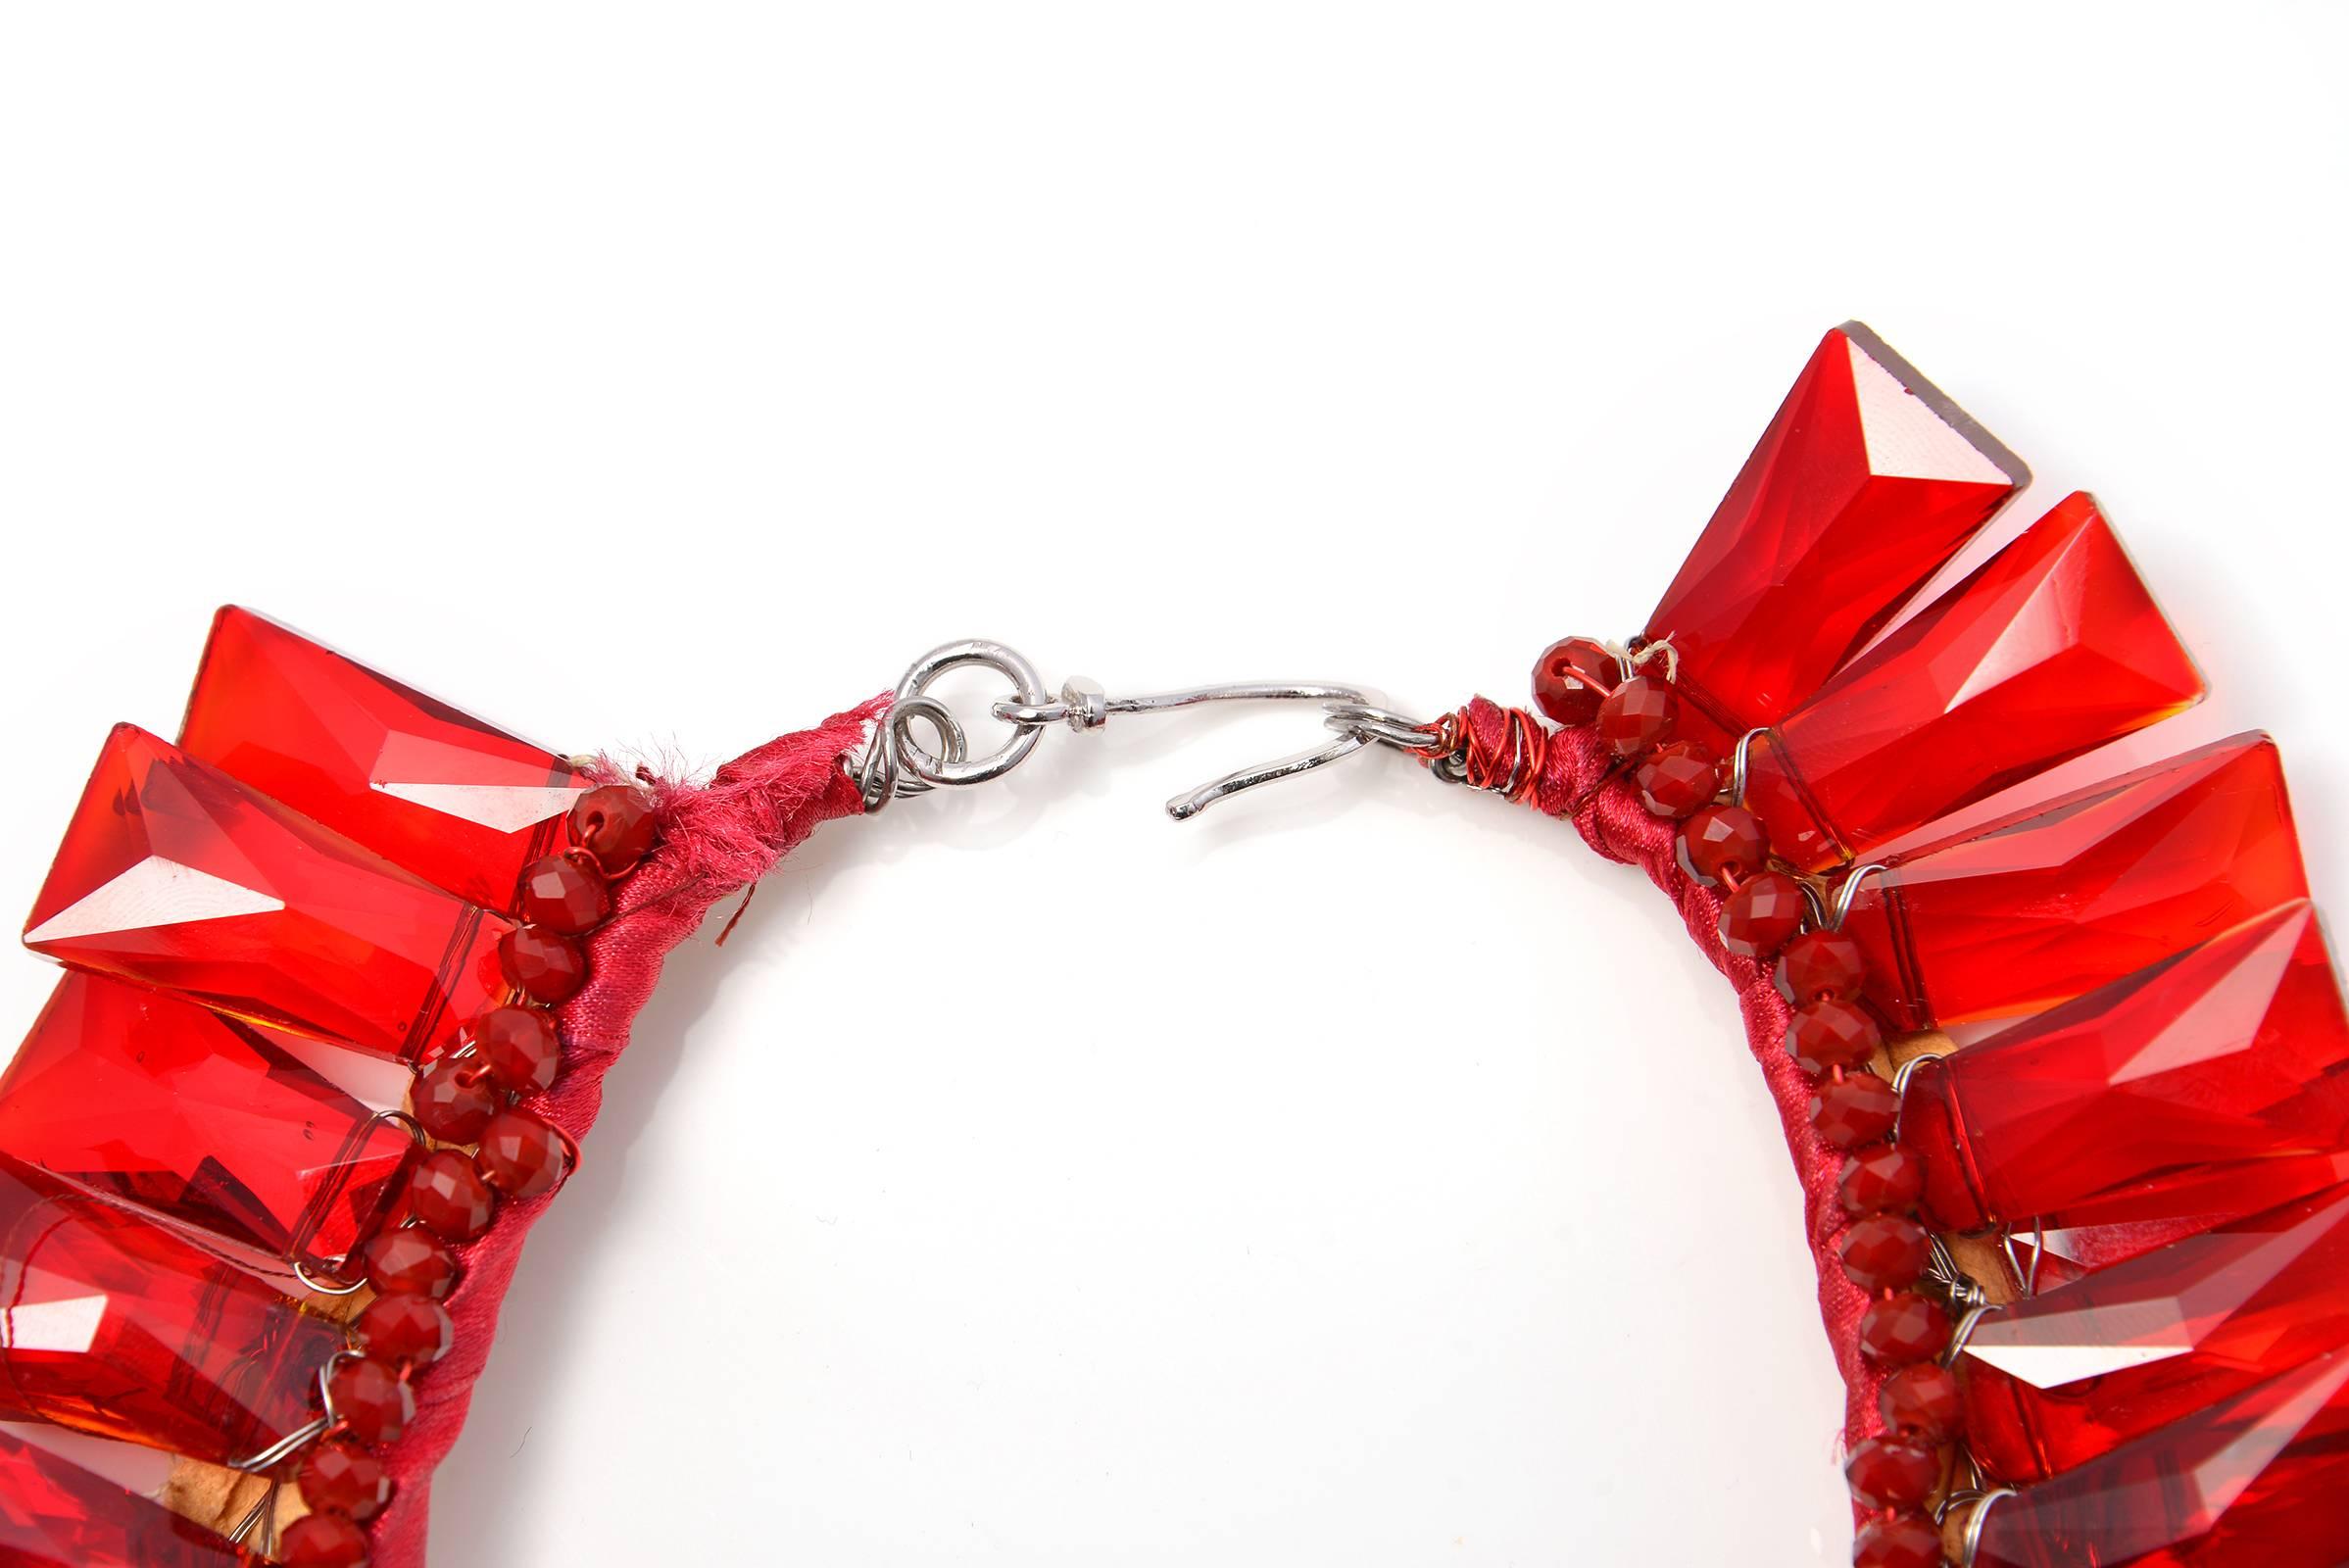 red crystal necklace